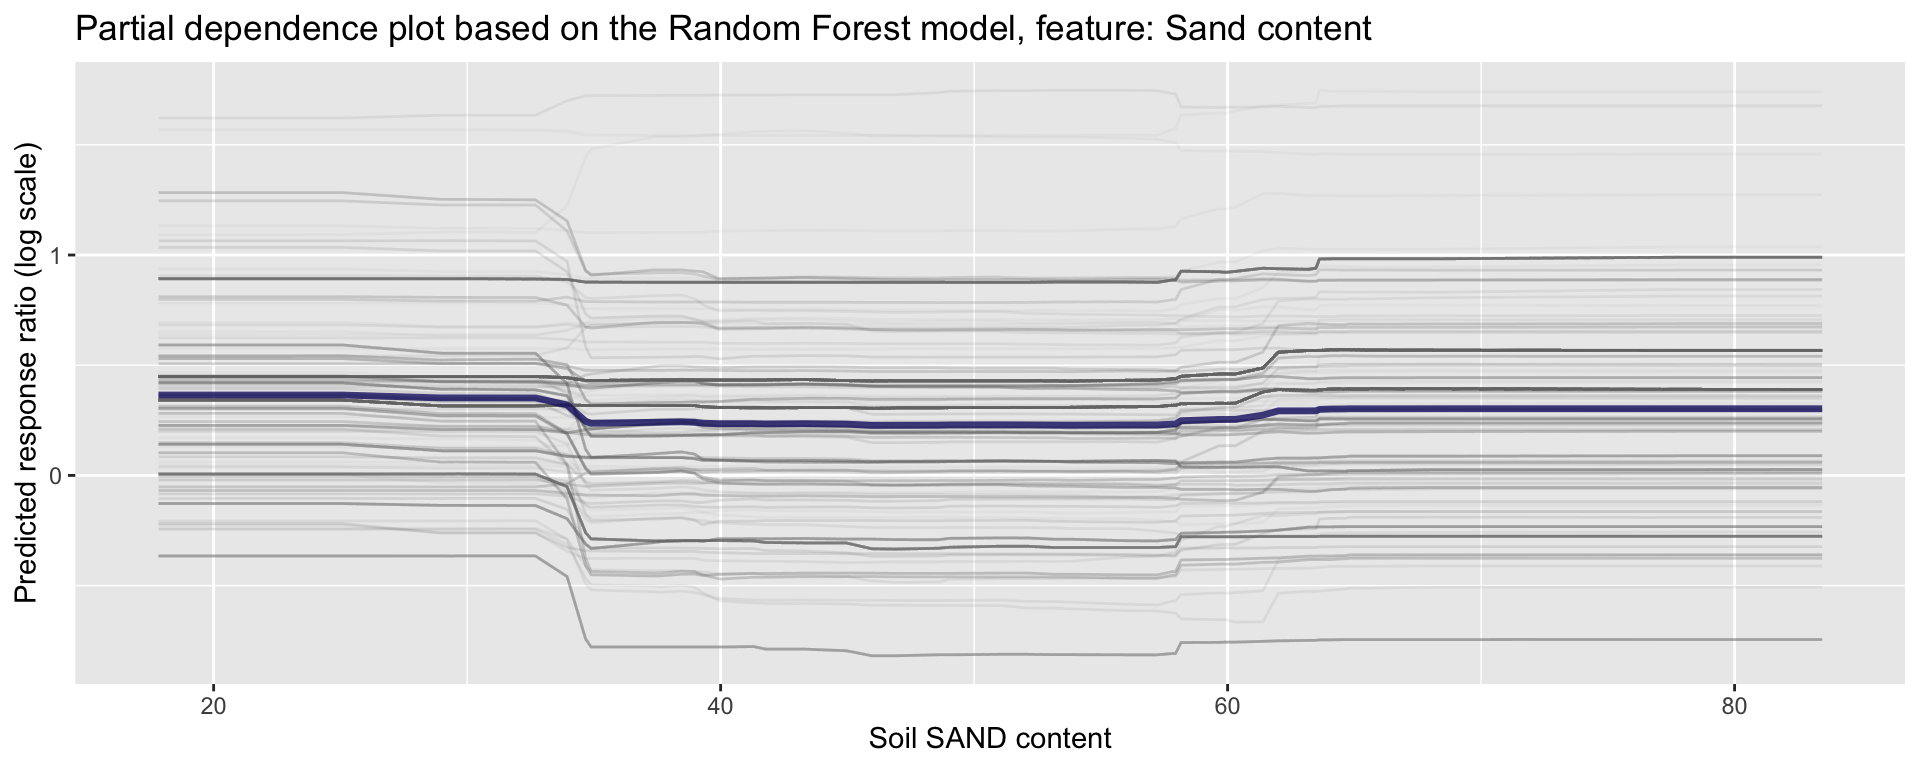 Partial dependence plot for sand content